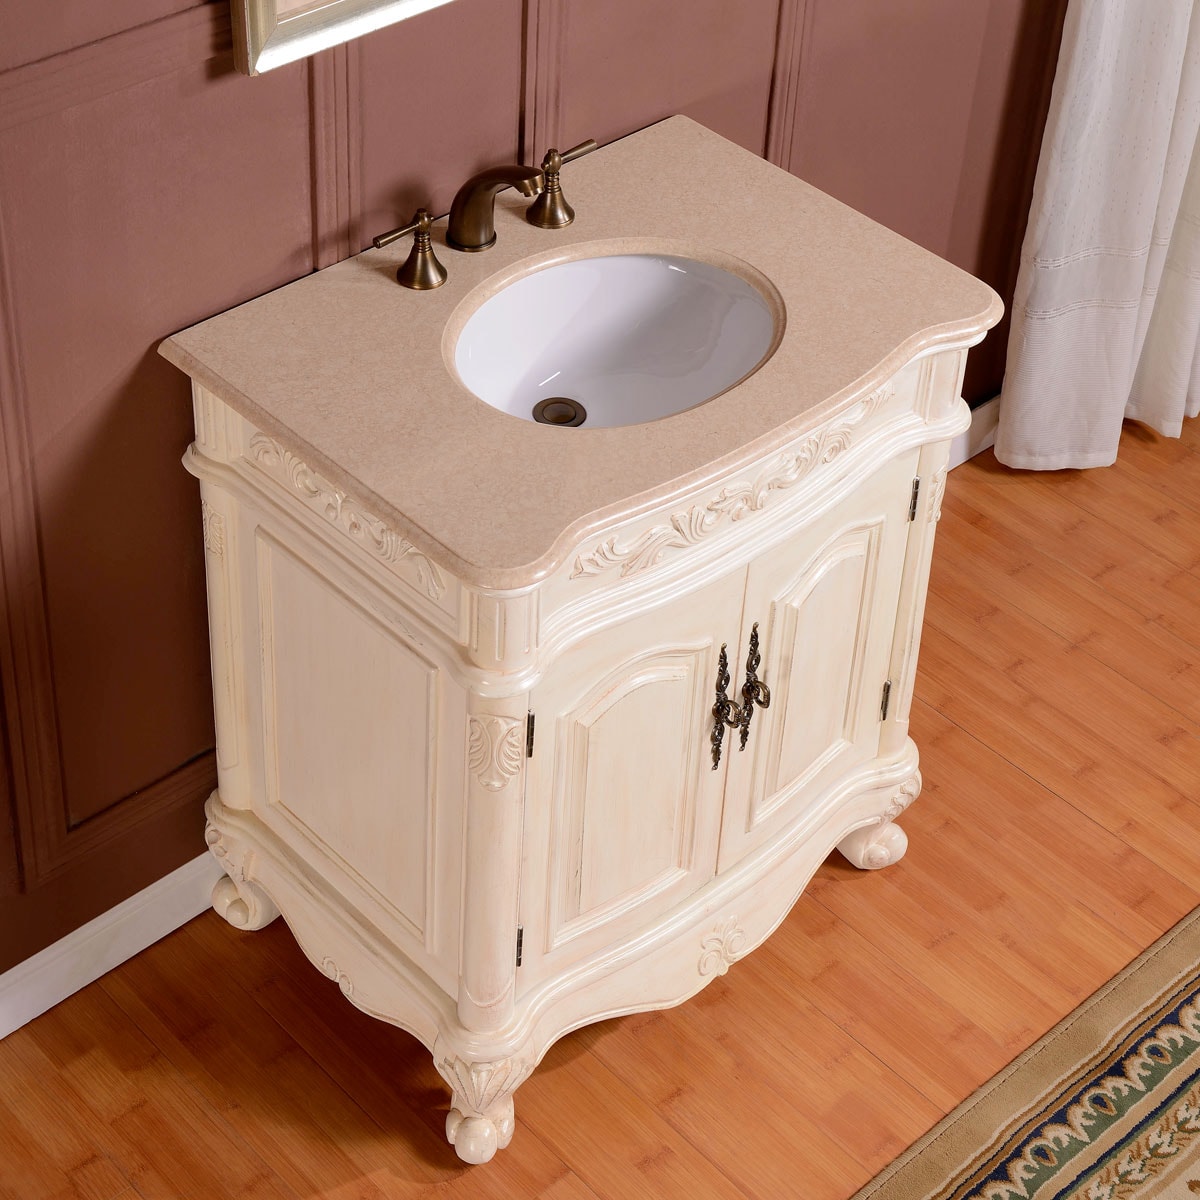 32-in Antique White Undermount Single Sink Bathroom Vanity with Crema Marfil Natural Marble Top in Off-White | - Silkroad Exclusive ZY-0250-CM-UWC-32